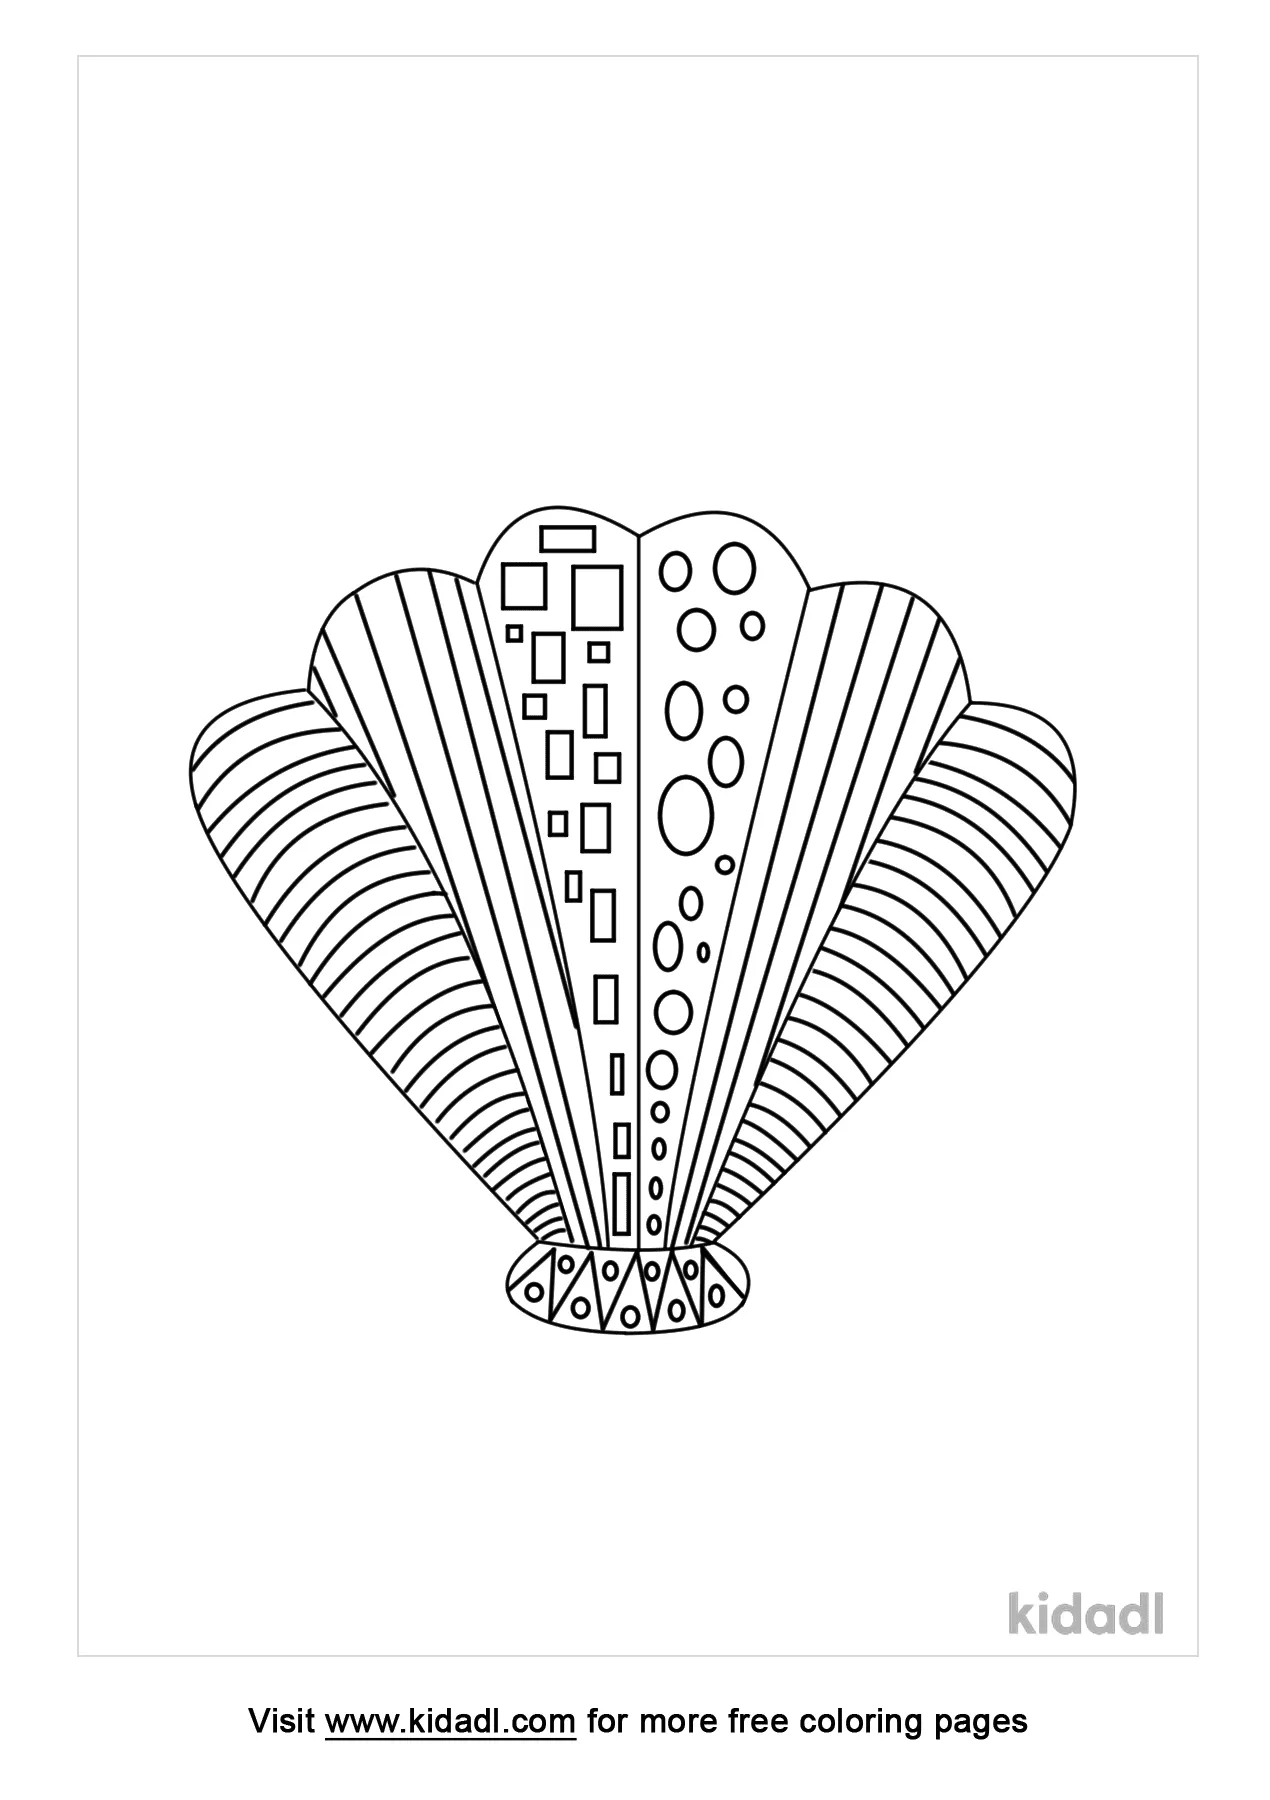 Zentangle Shell Coloring Page